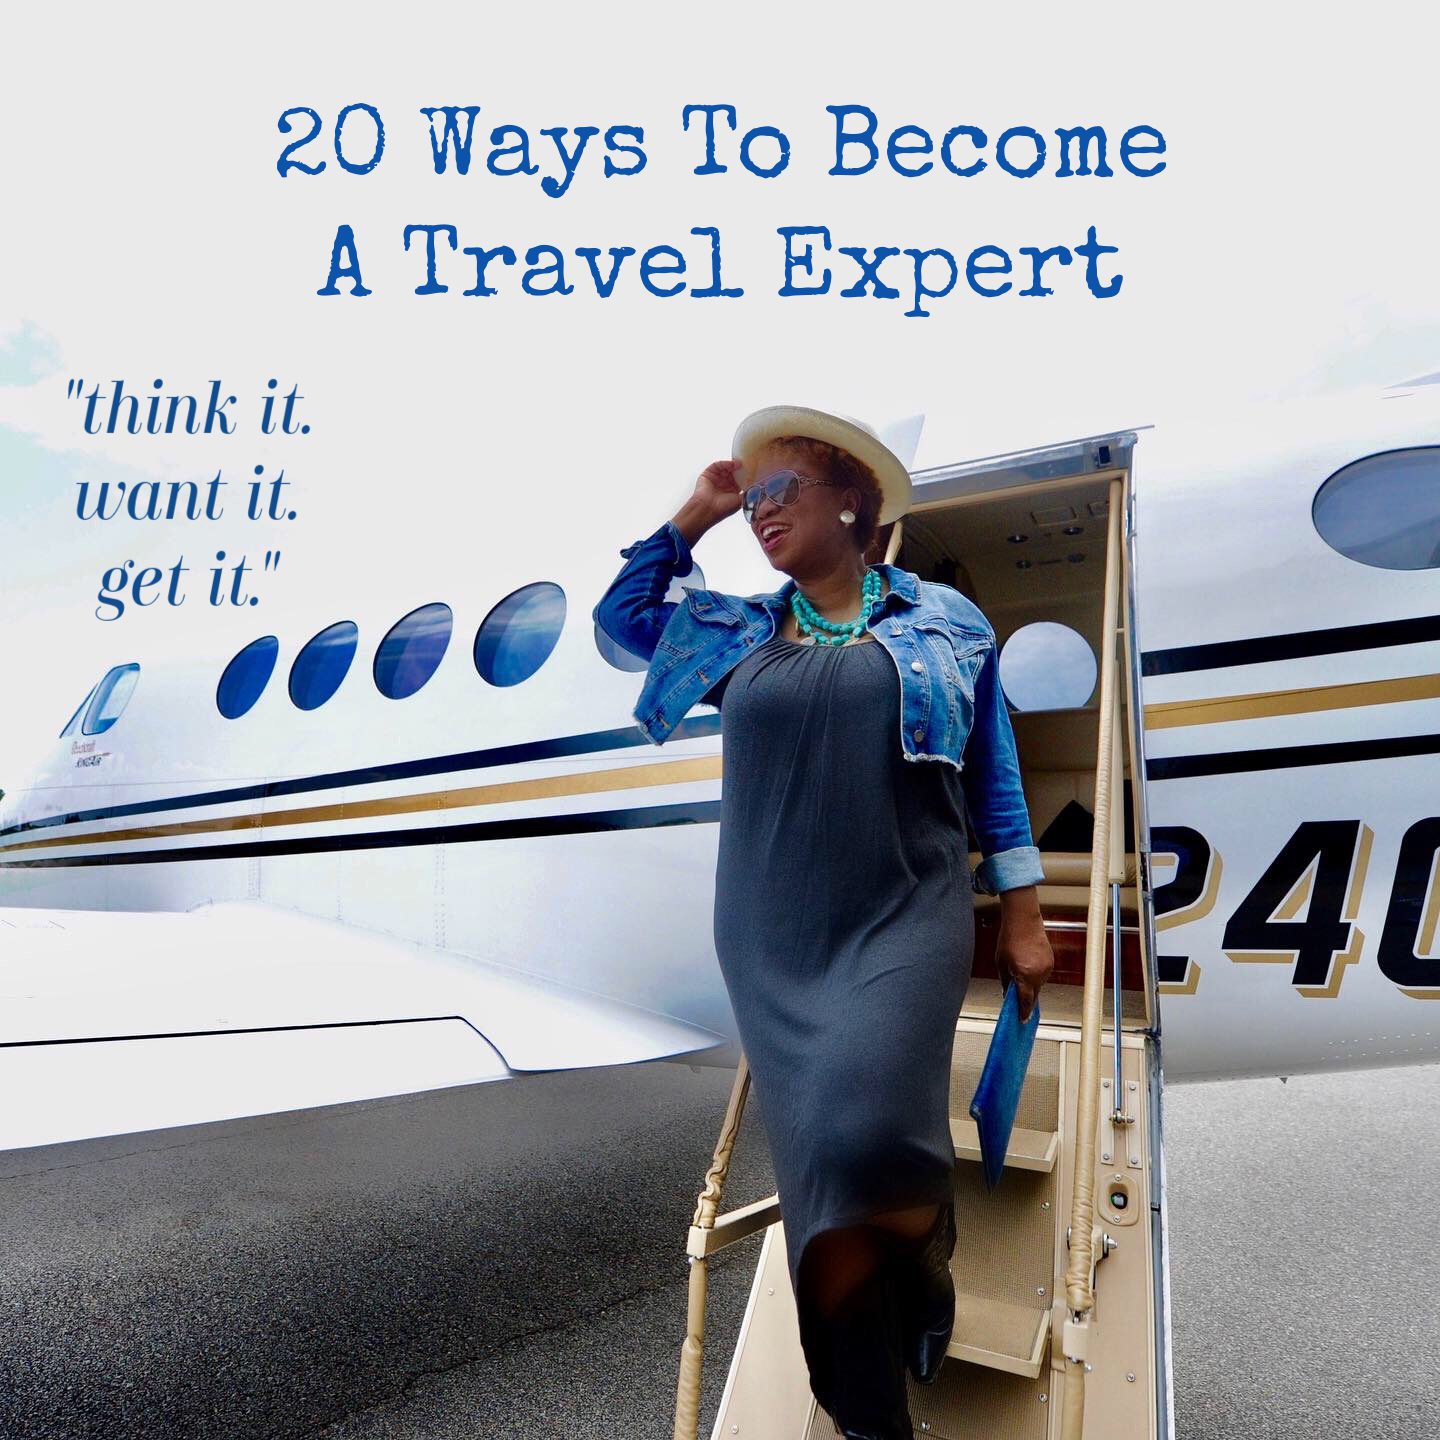 20 Ways To Become A Travel Expert